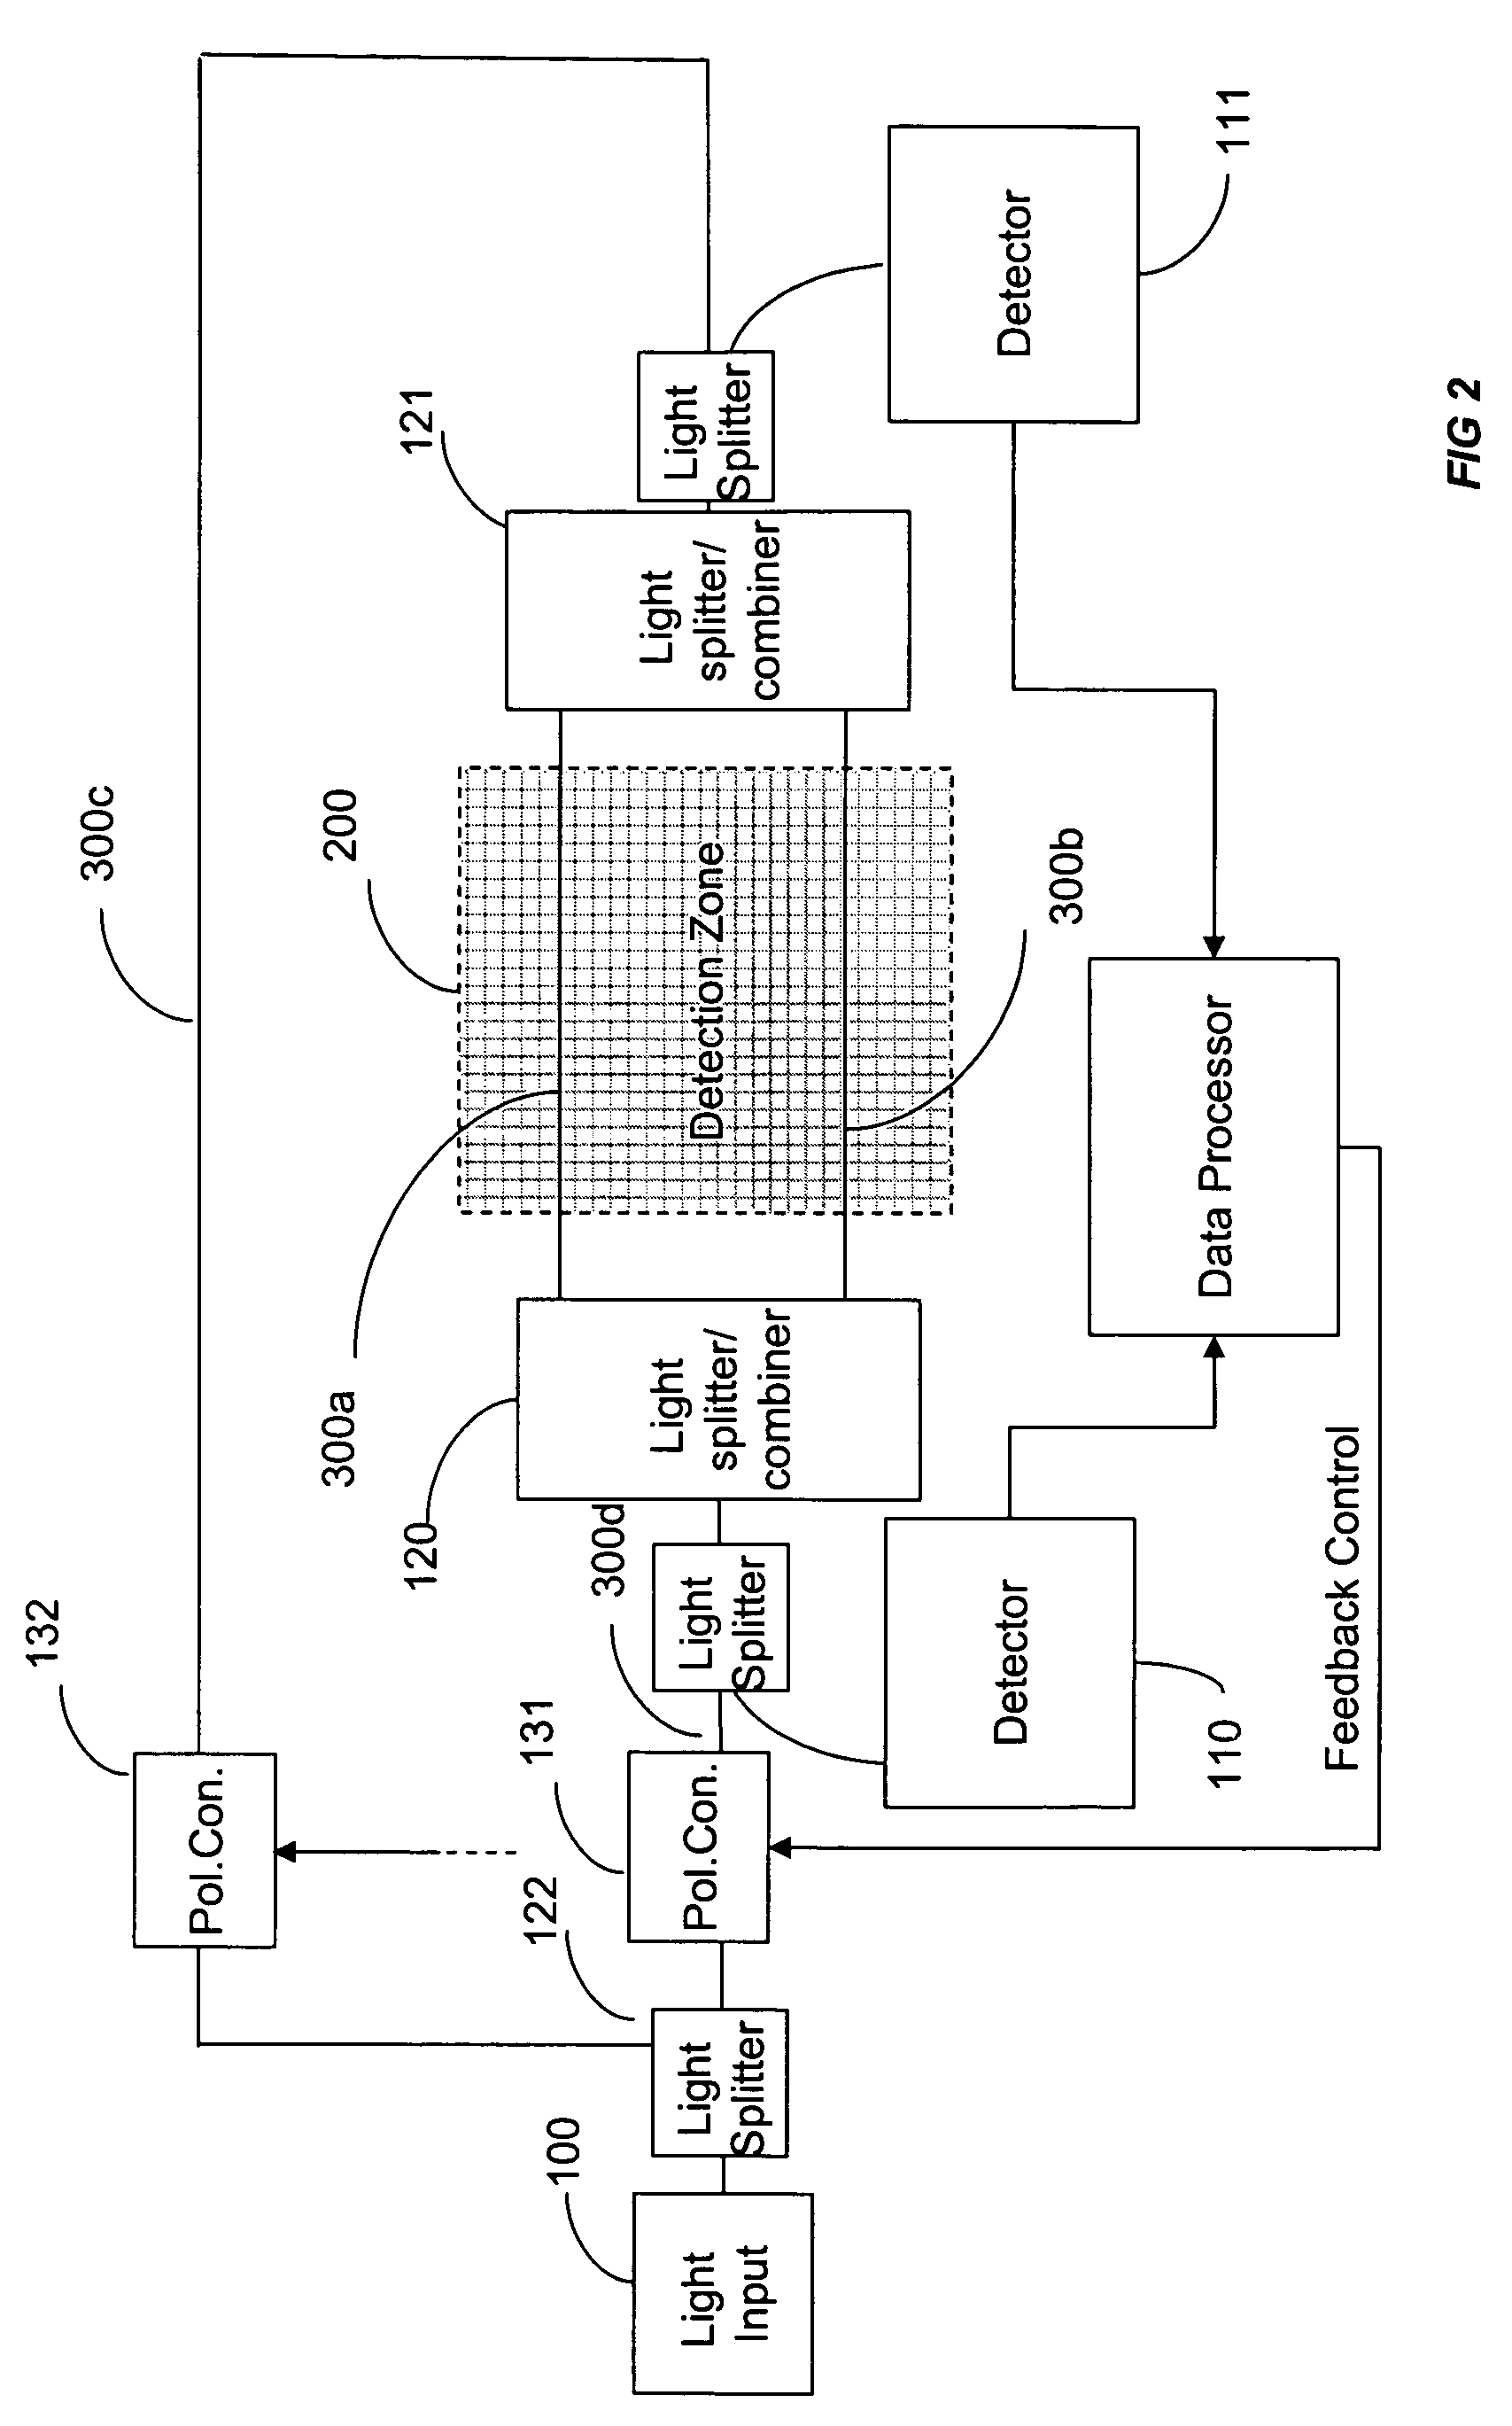 Distributed fiber sensor with interference detection and polarization state management